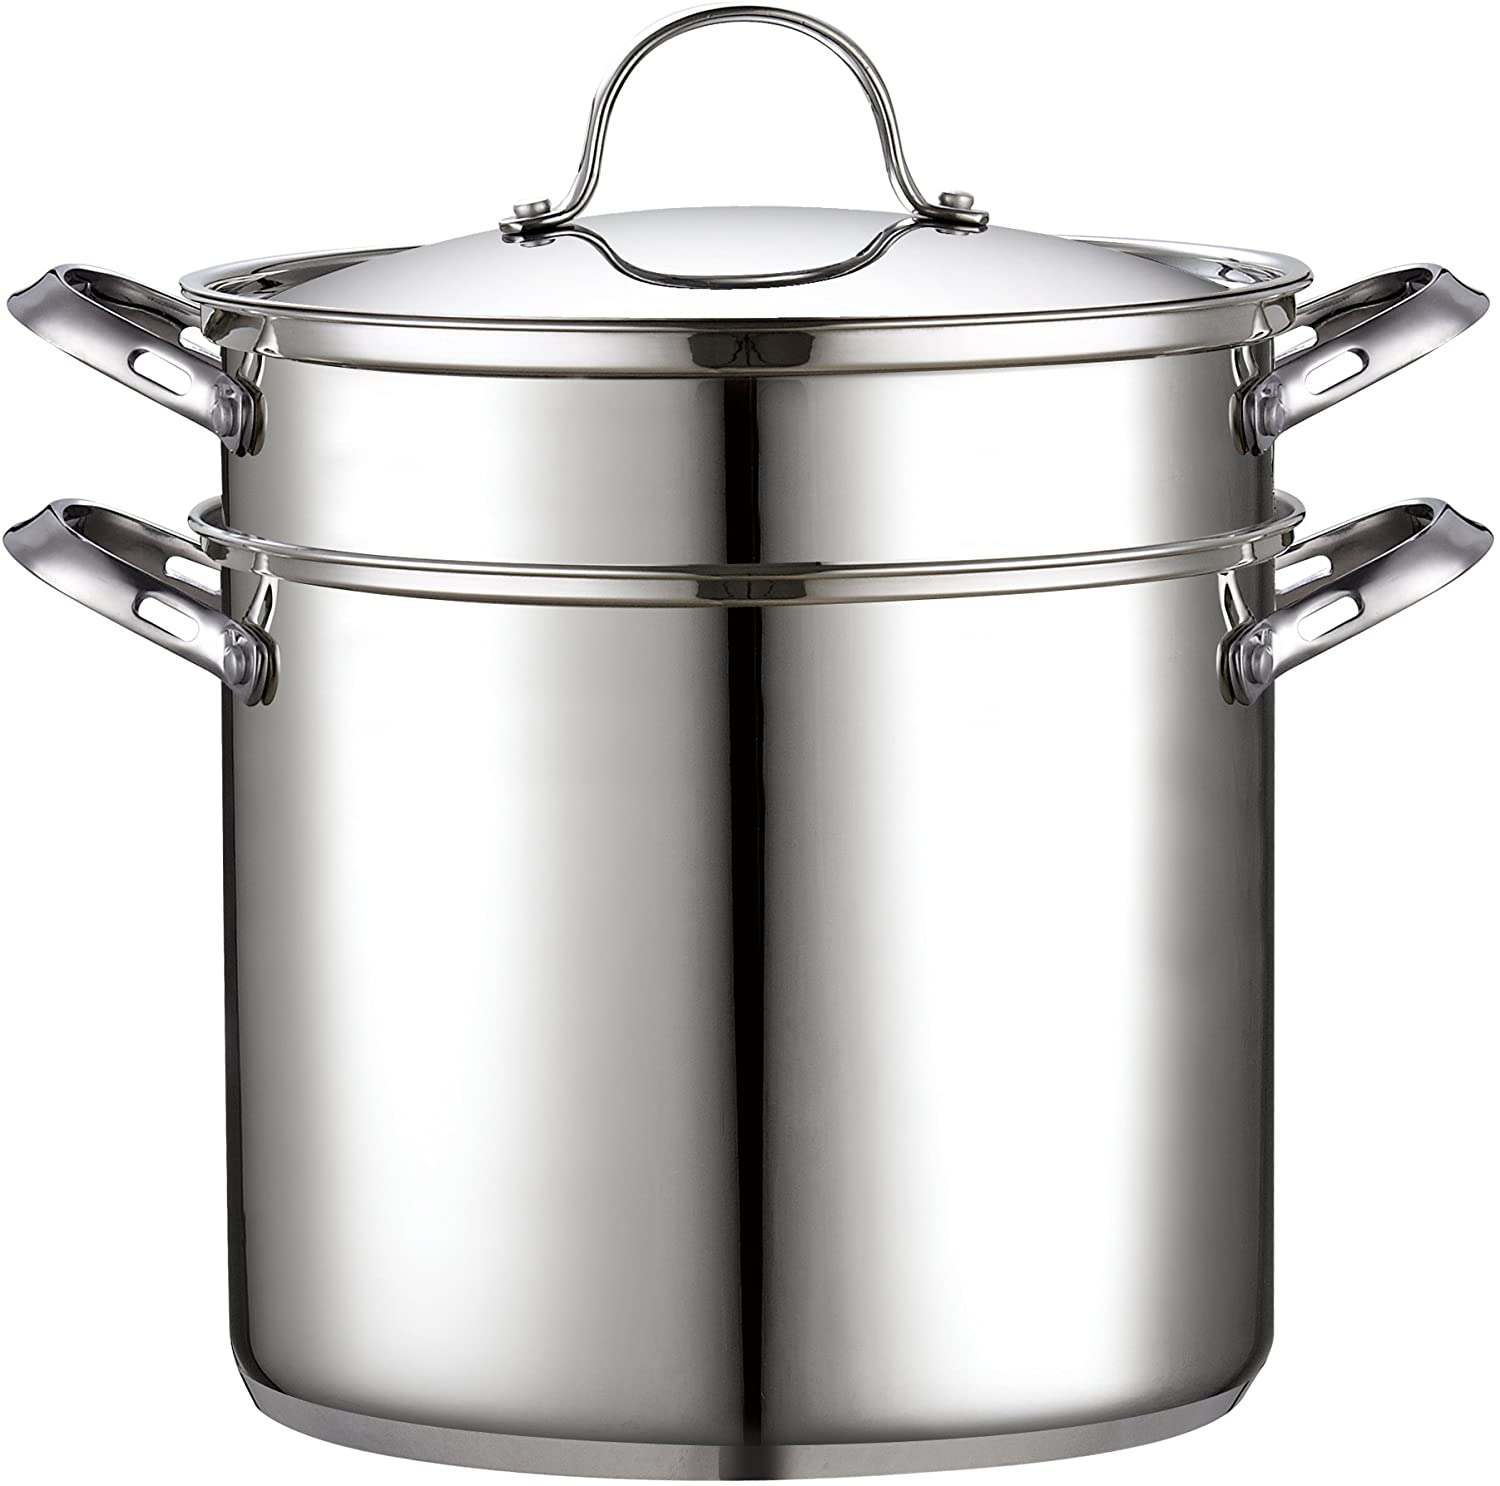 12 Quart Stock Pot Pasta Cooker With Strainer Stainless Steel